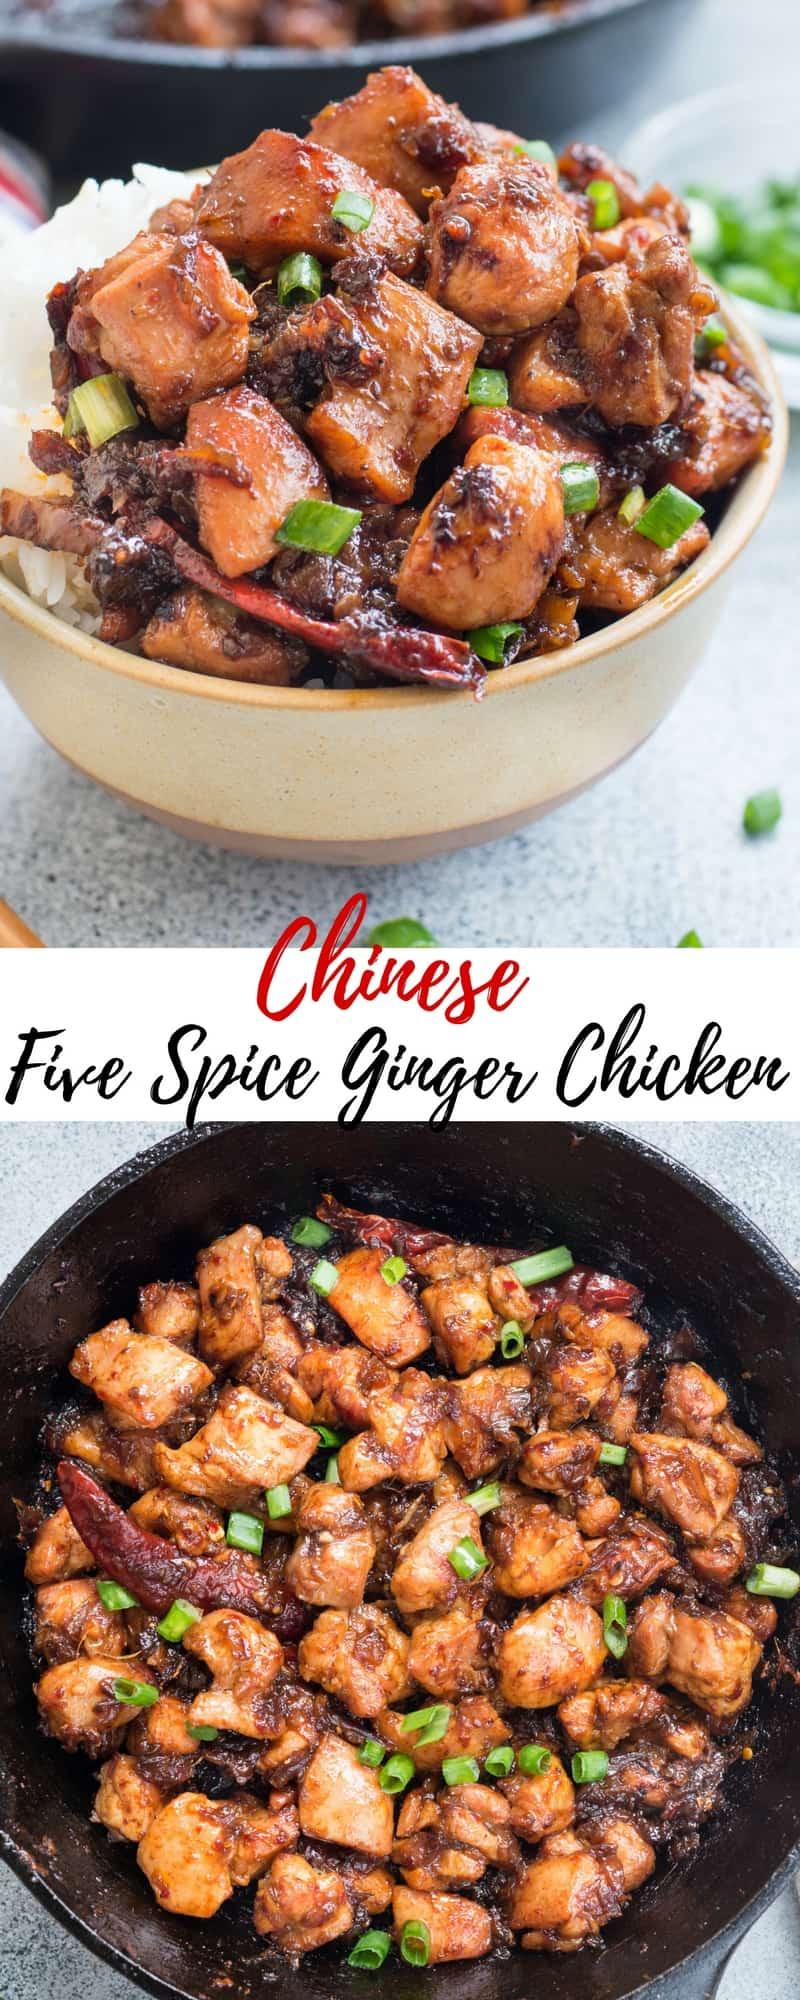 Recipes Using Chinese Five Spice
 Chinese Five Spice Ginger Chicken The flavours of kitchen